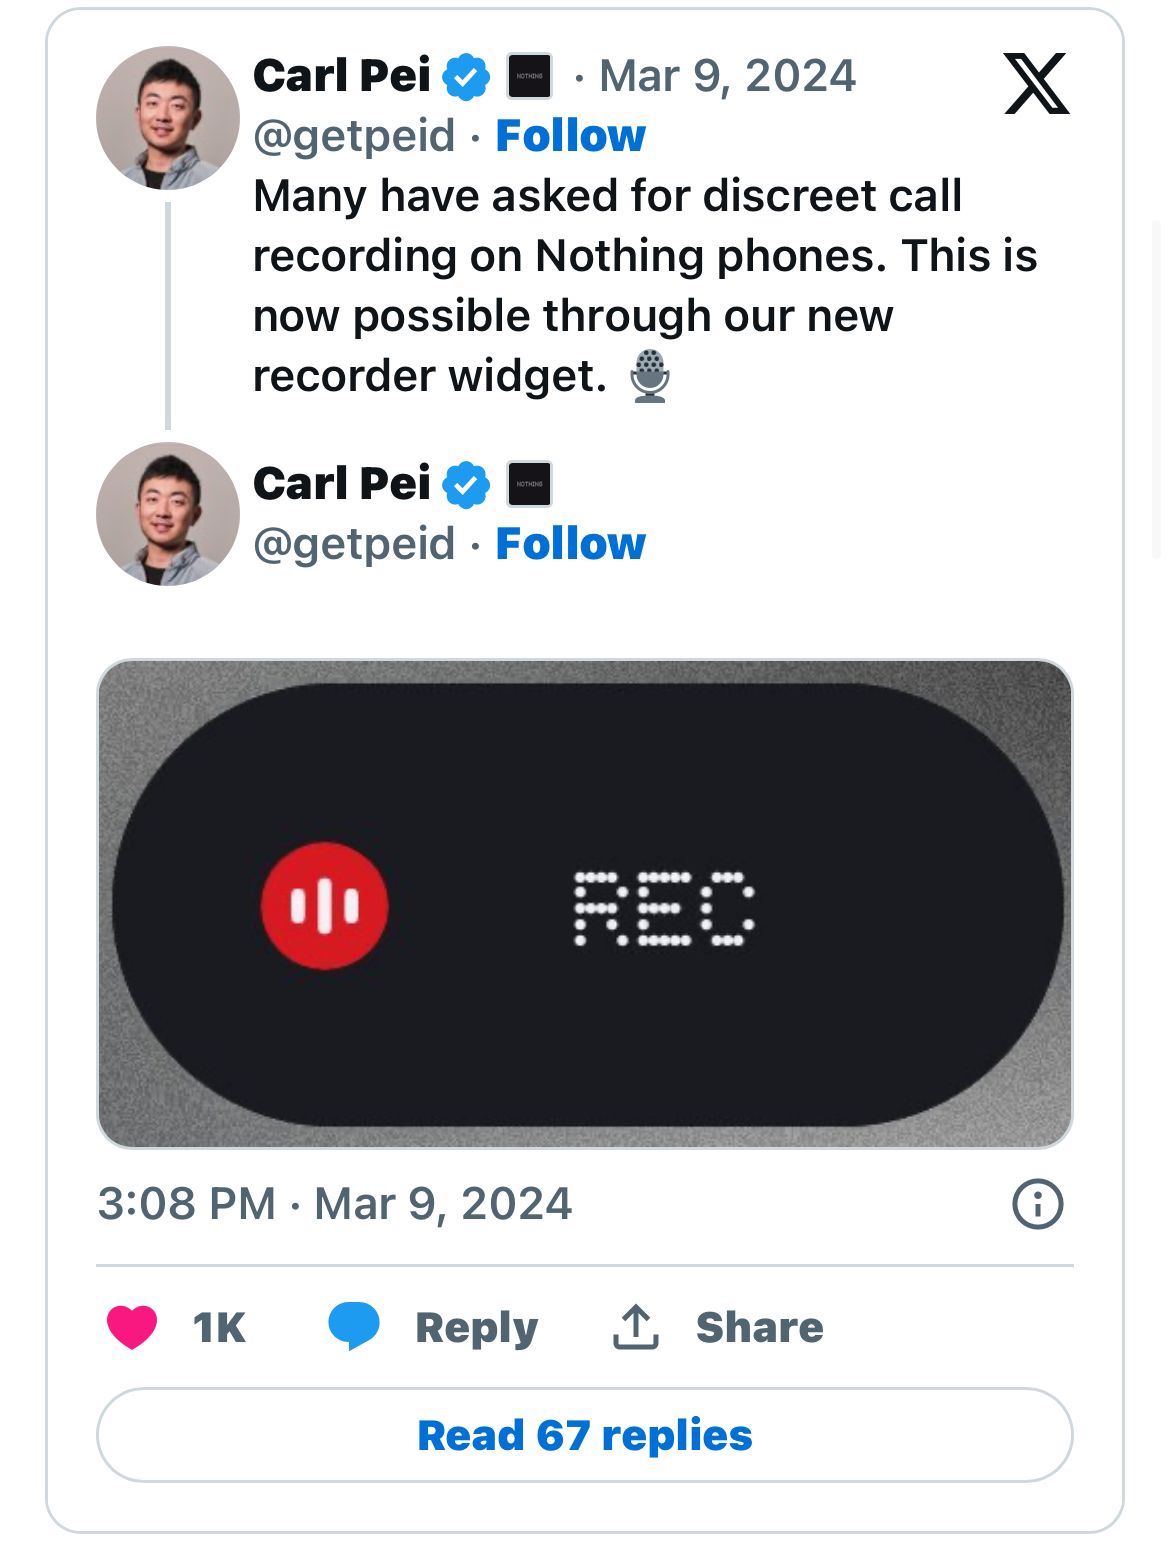 Nothing to allow discreet call recordings according to Carl Pei